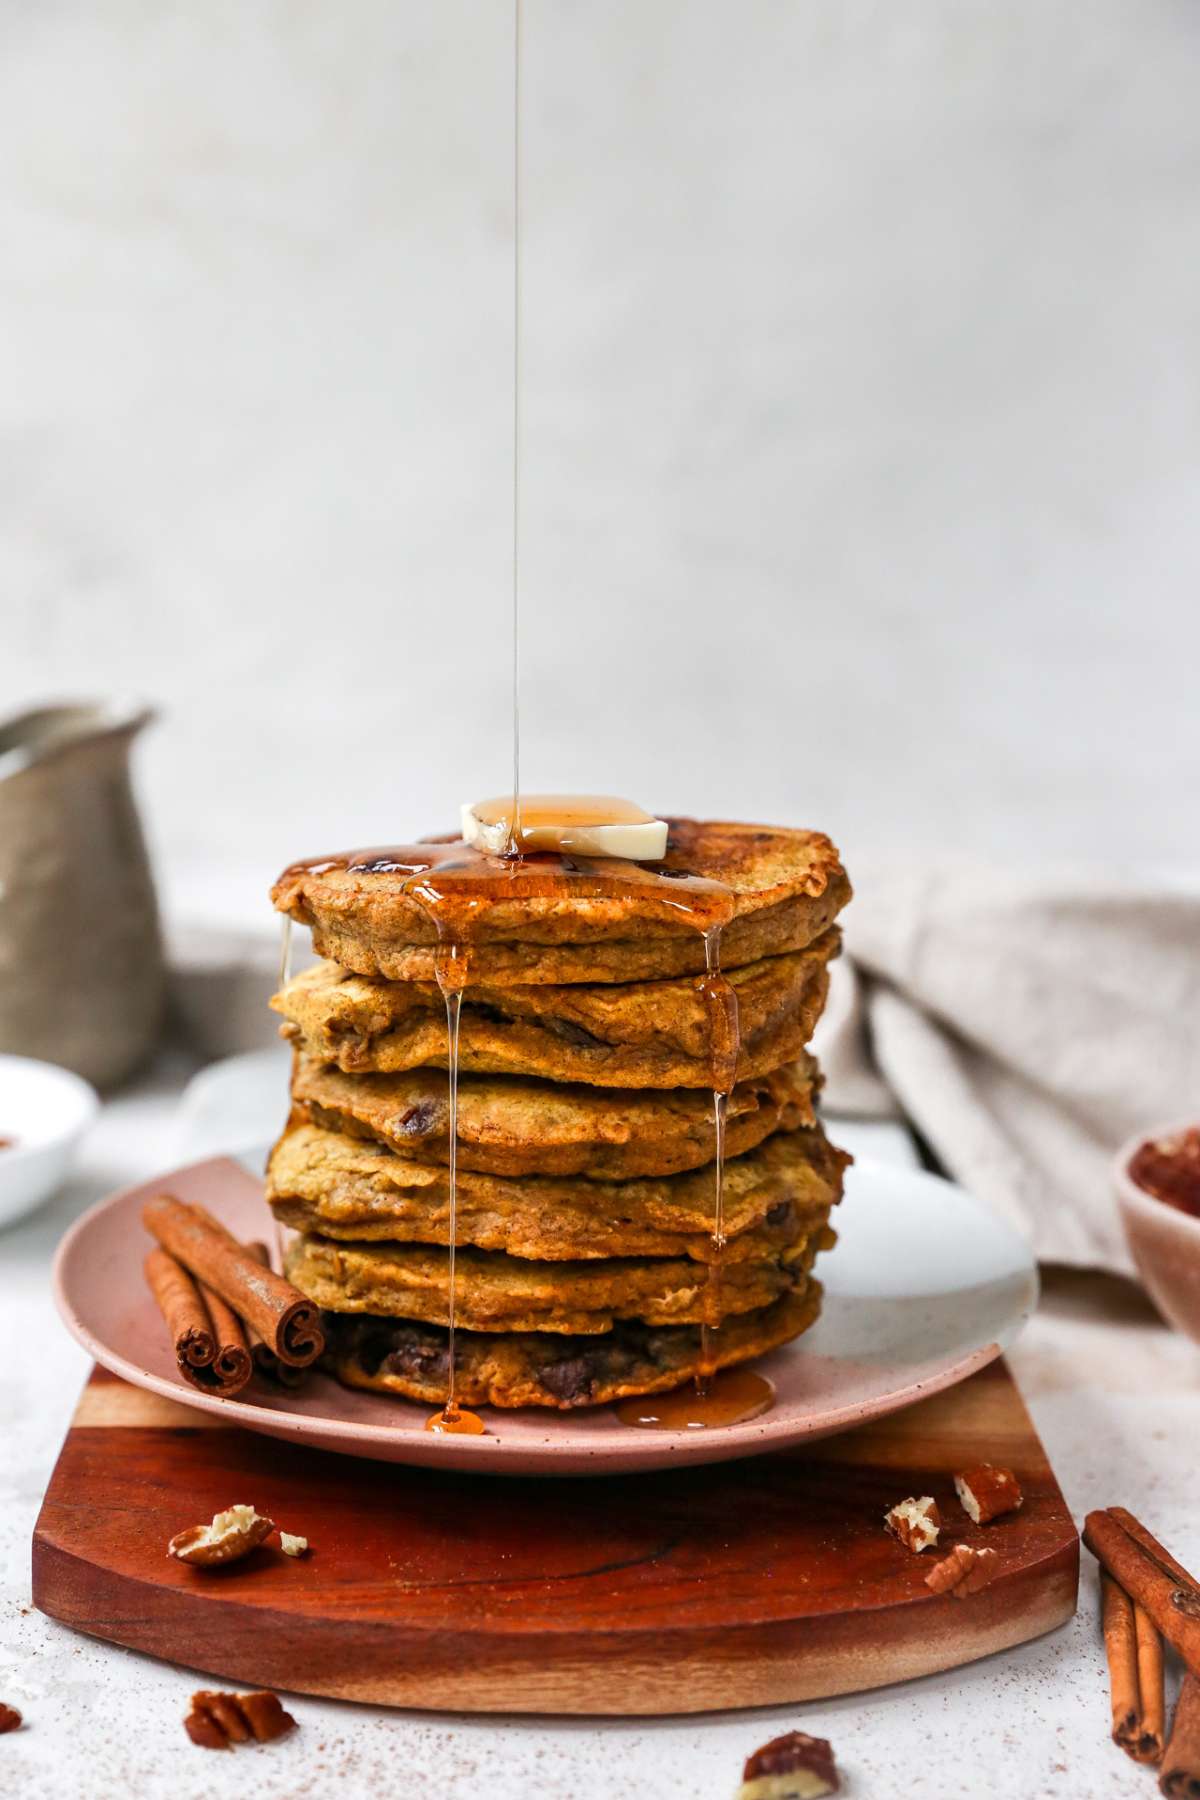 Stack of pancakes with syrup dripping down the side.